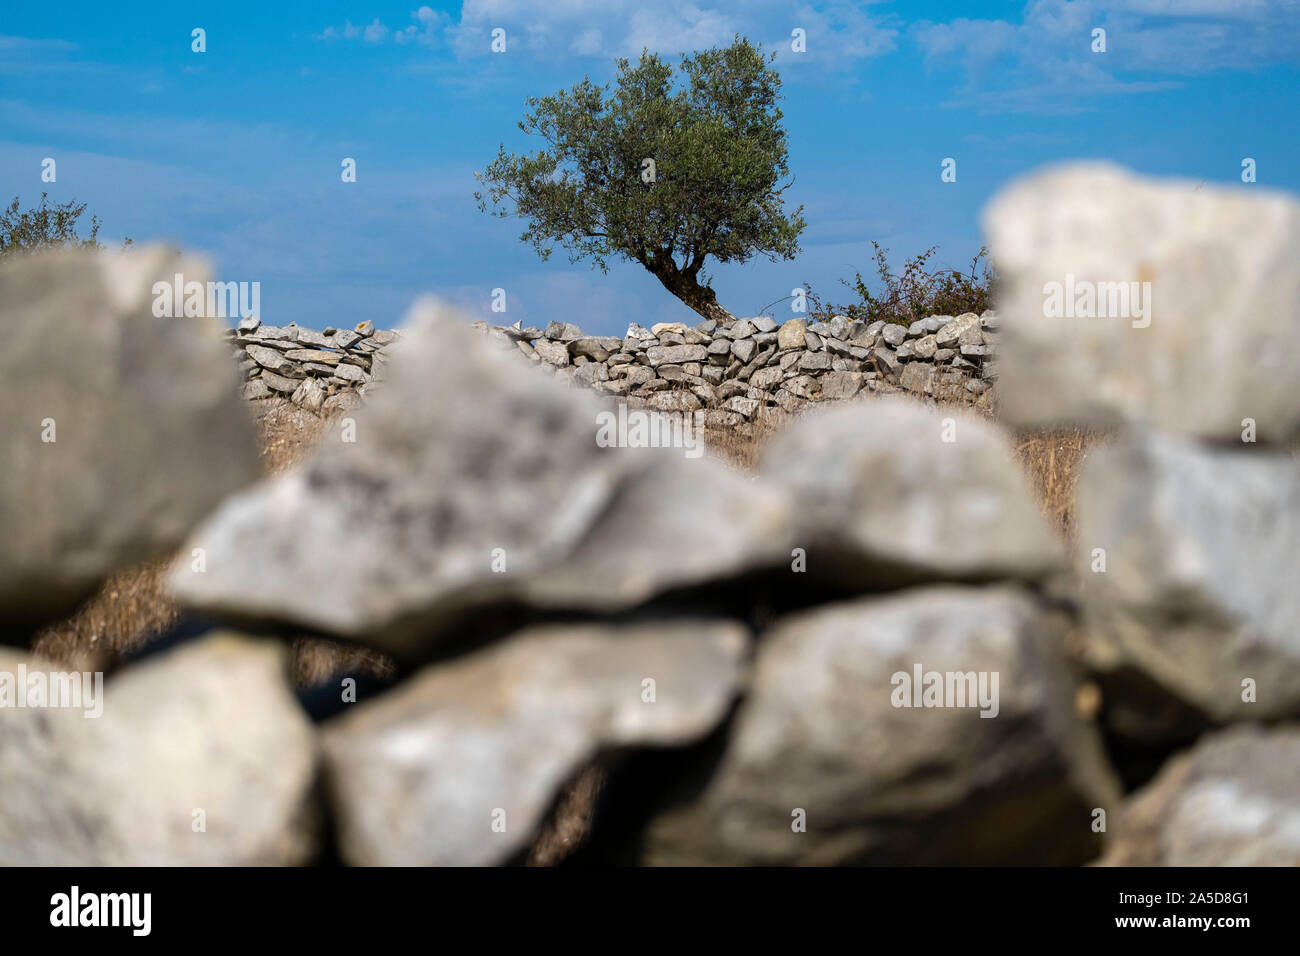 Traditional stone wall made with rocks Stock Photo